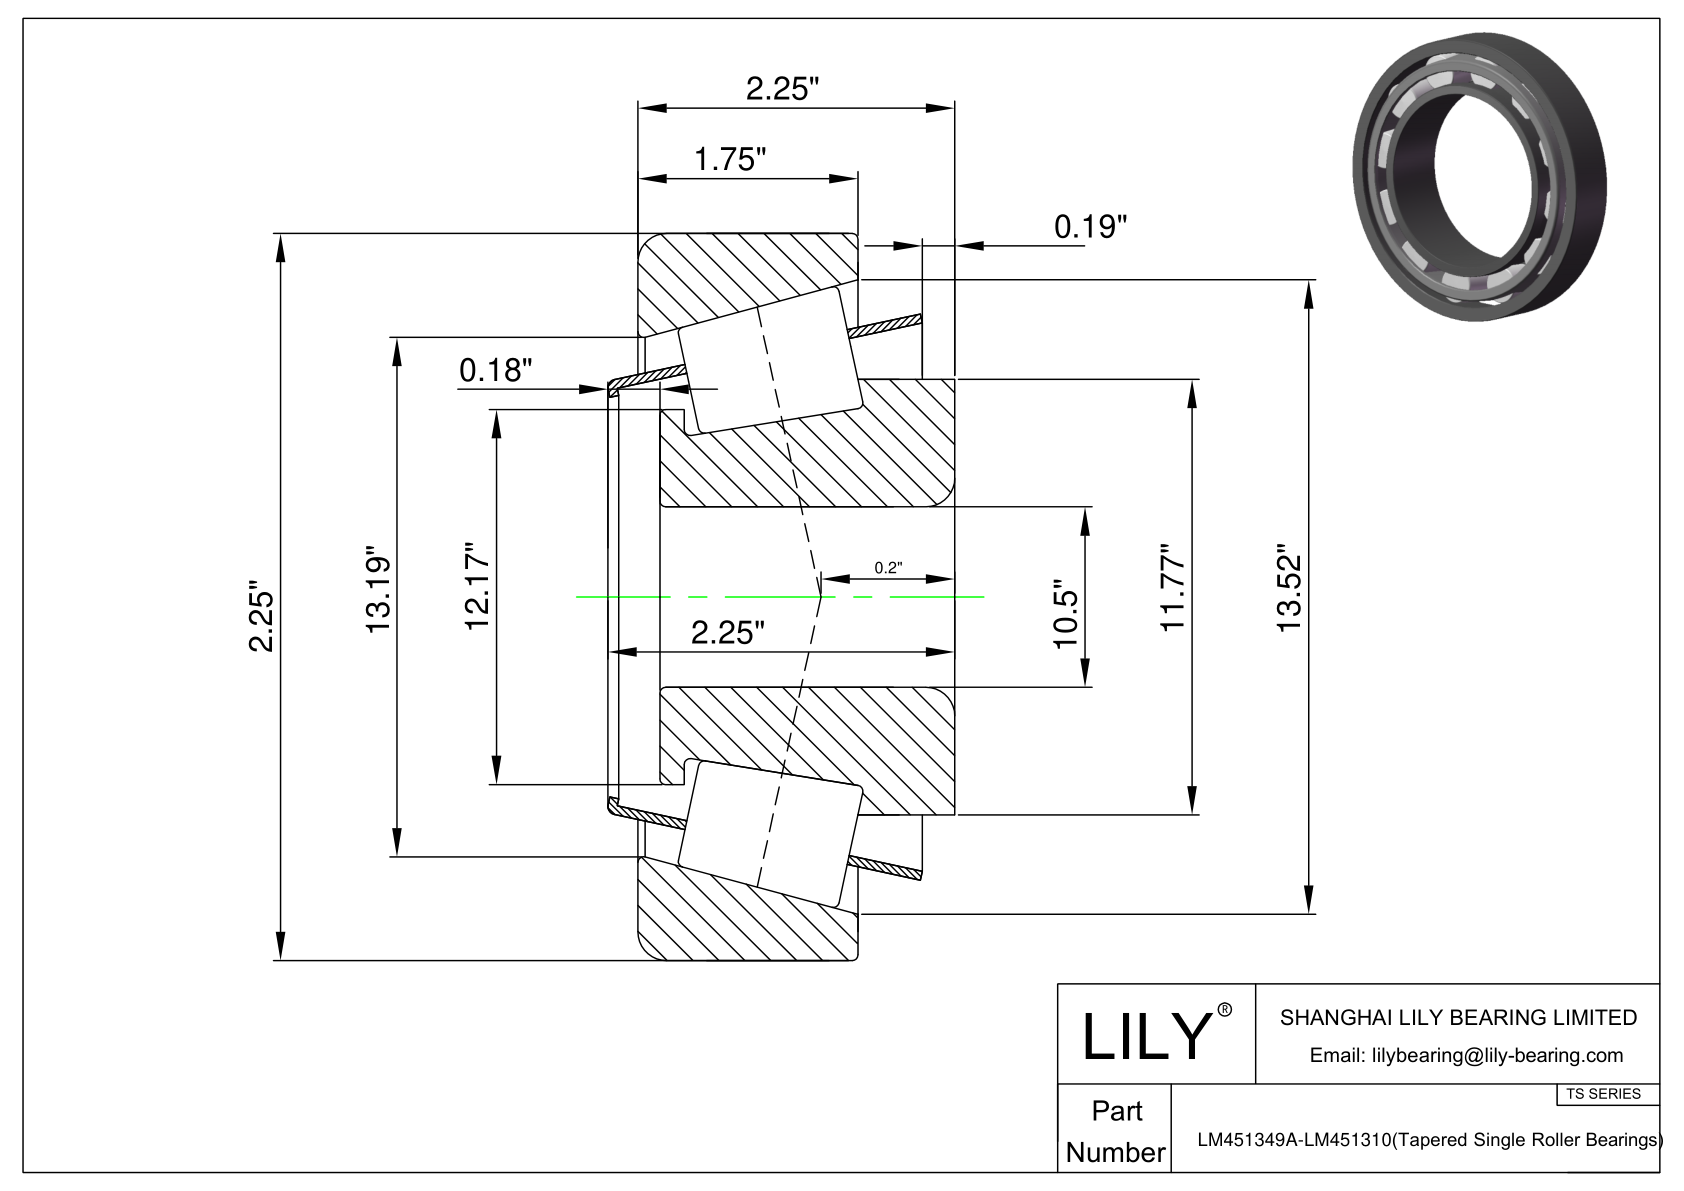 LM451349A-LM451310 TS (Tapered Single Roller Bearings) (Imperial) cad drawing